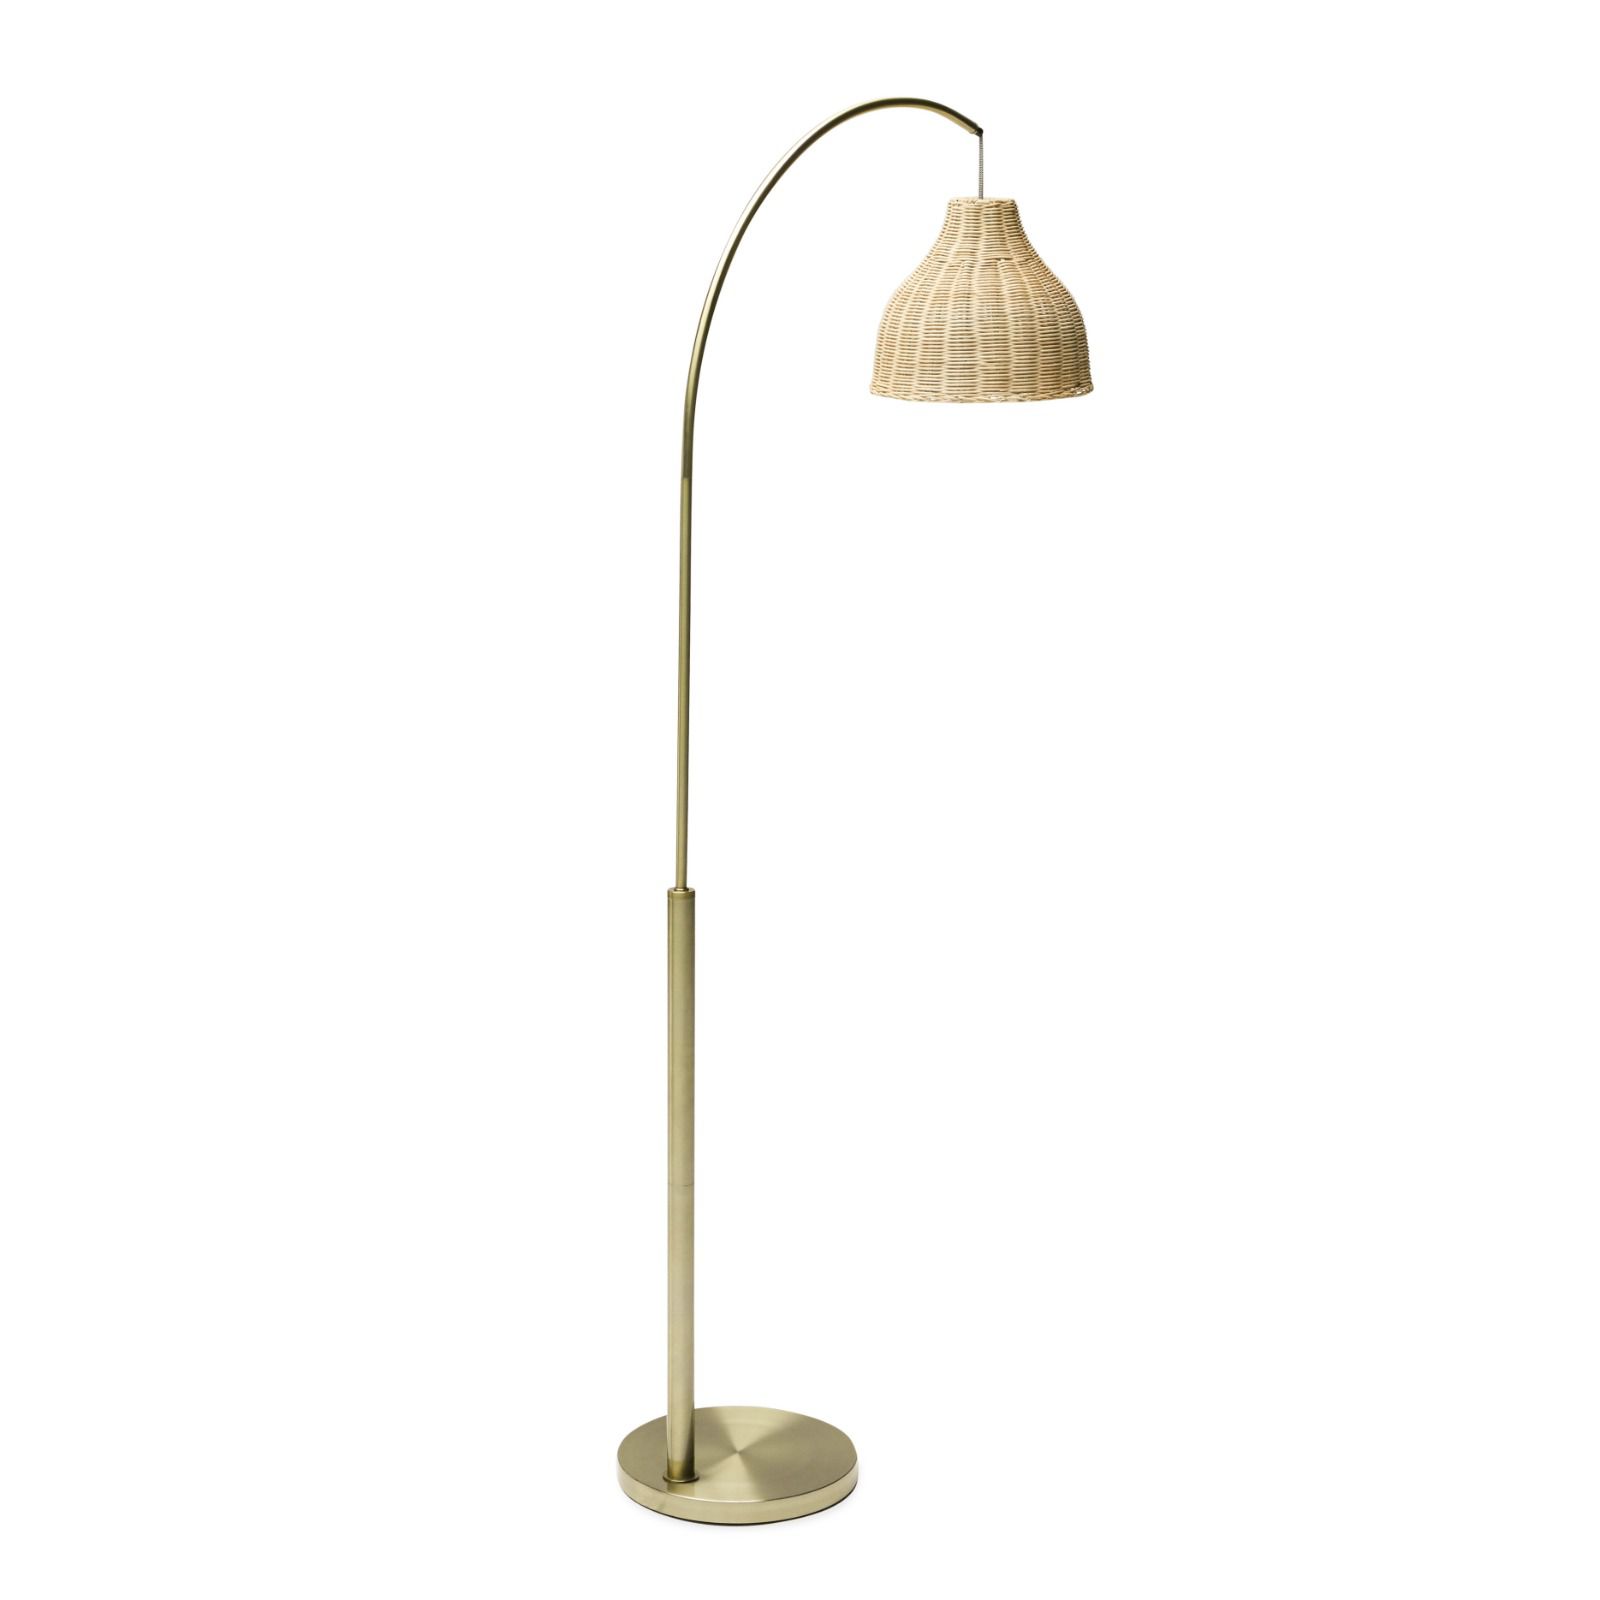 Antique Brass Arch Floor Lamp with Rattan Shade by Drew Barrymore Flower Home